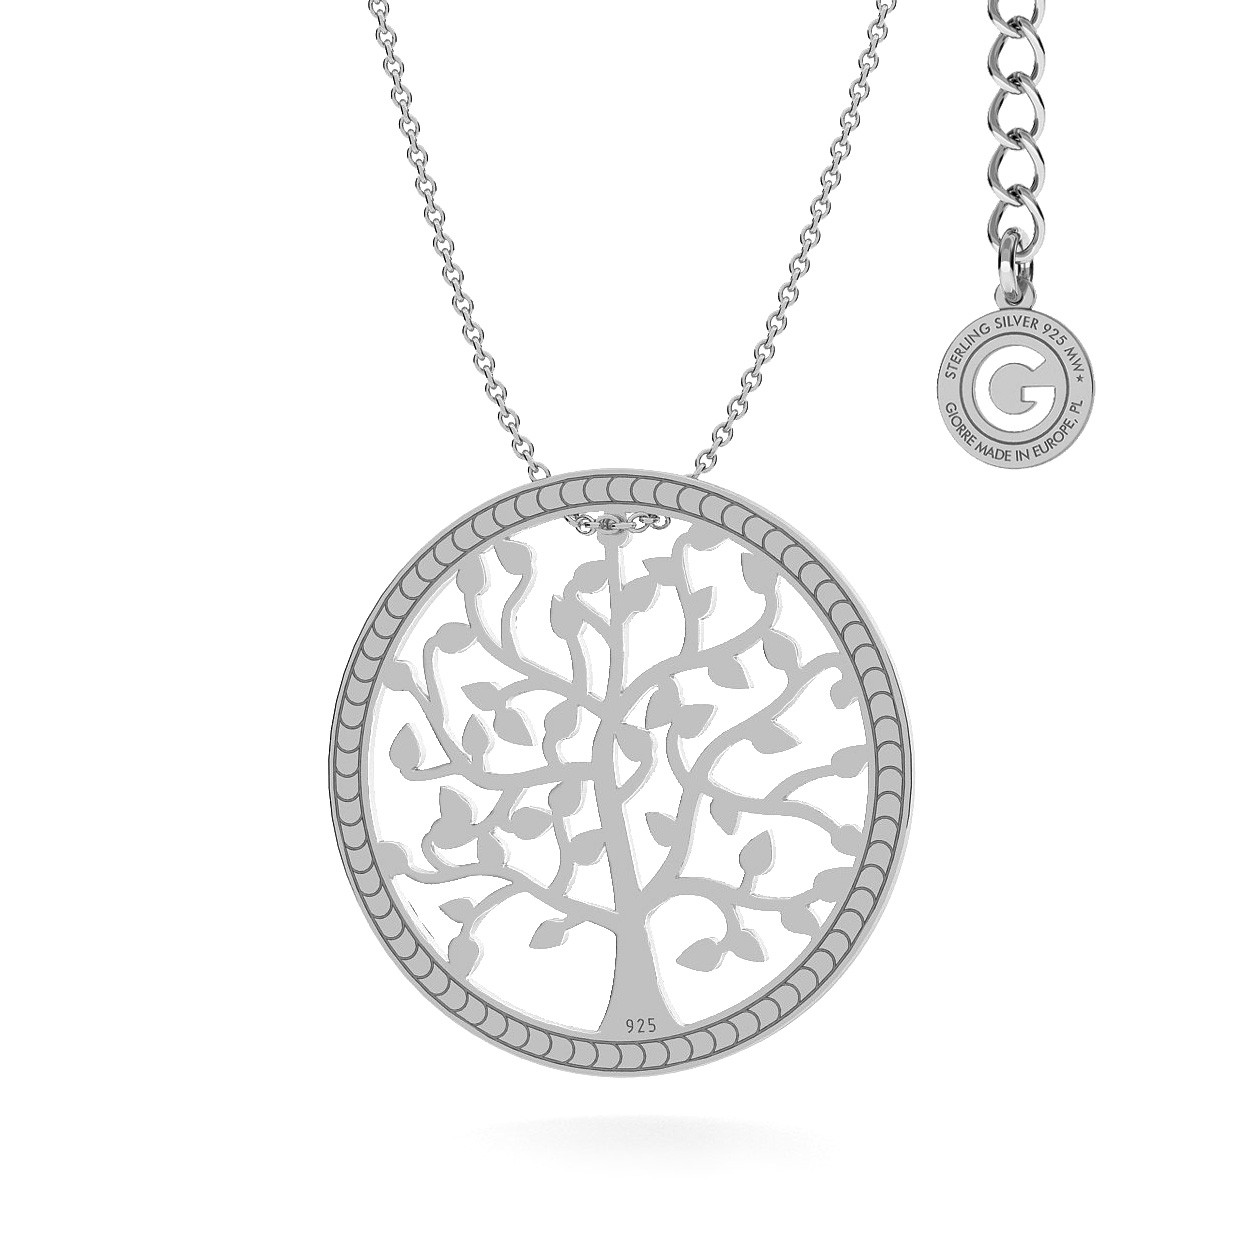 Tree of life necklace sterling silver 925